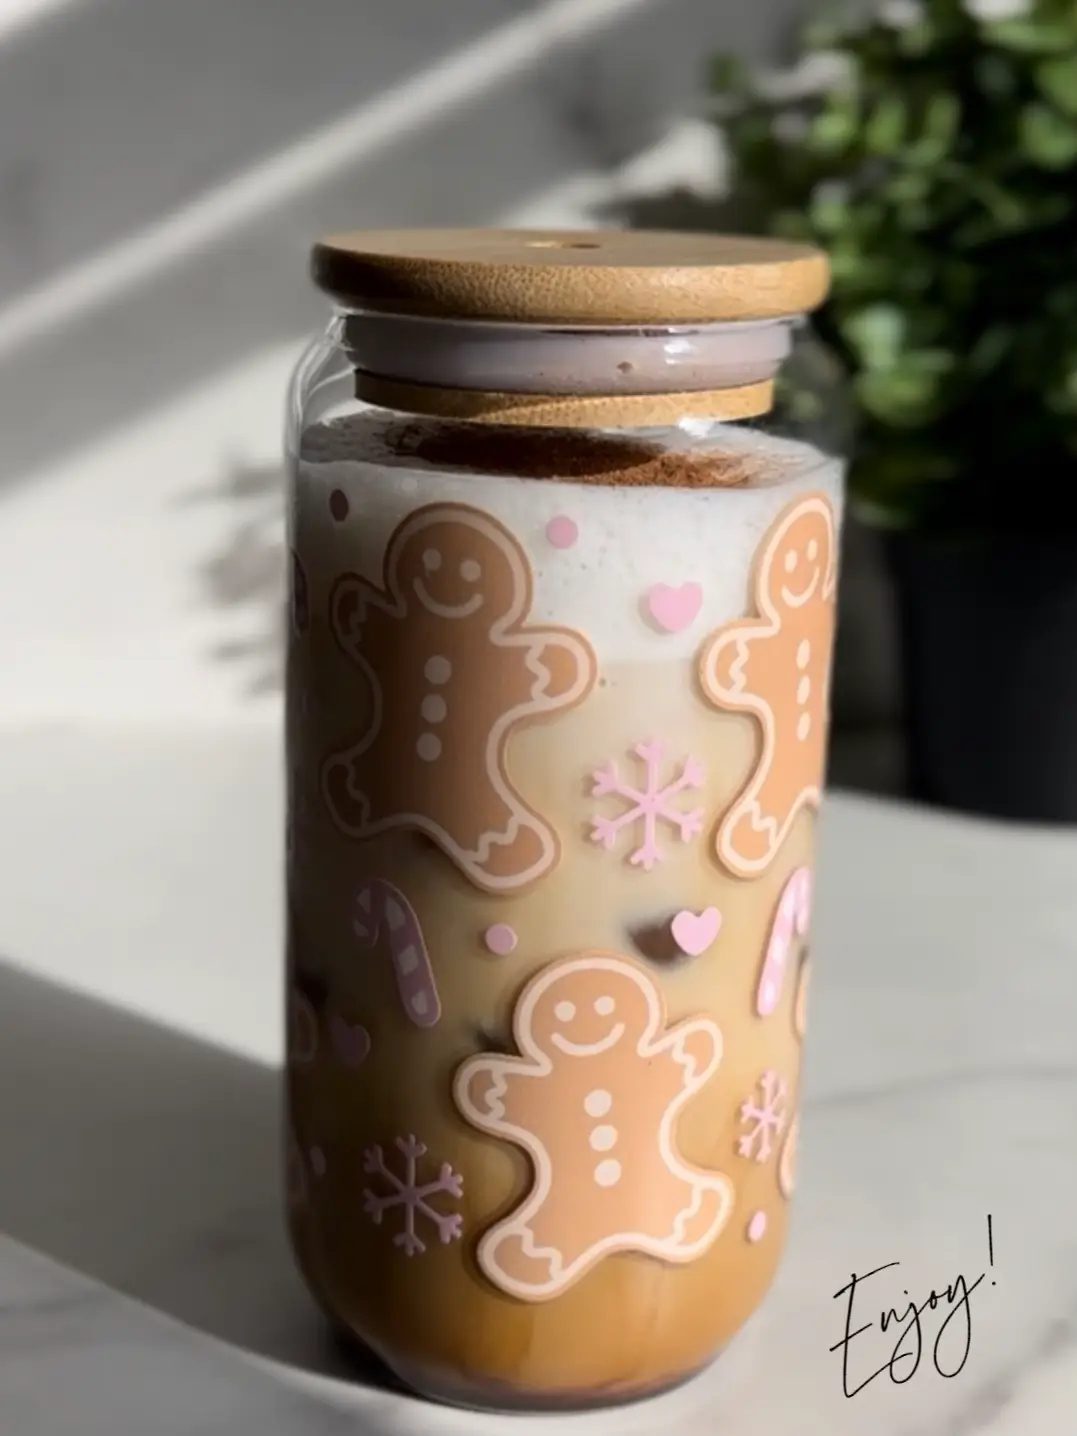  A jar with a snowman on it.